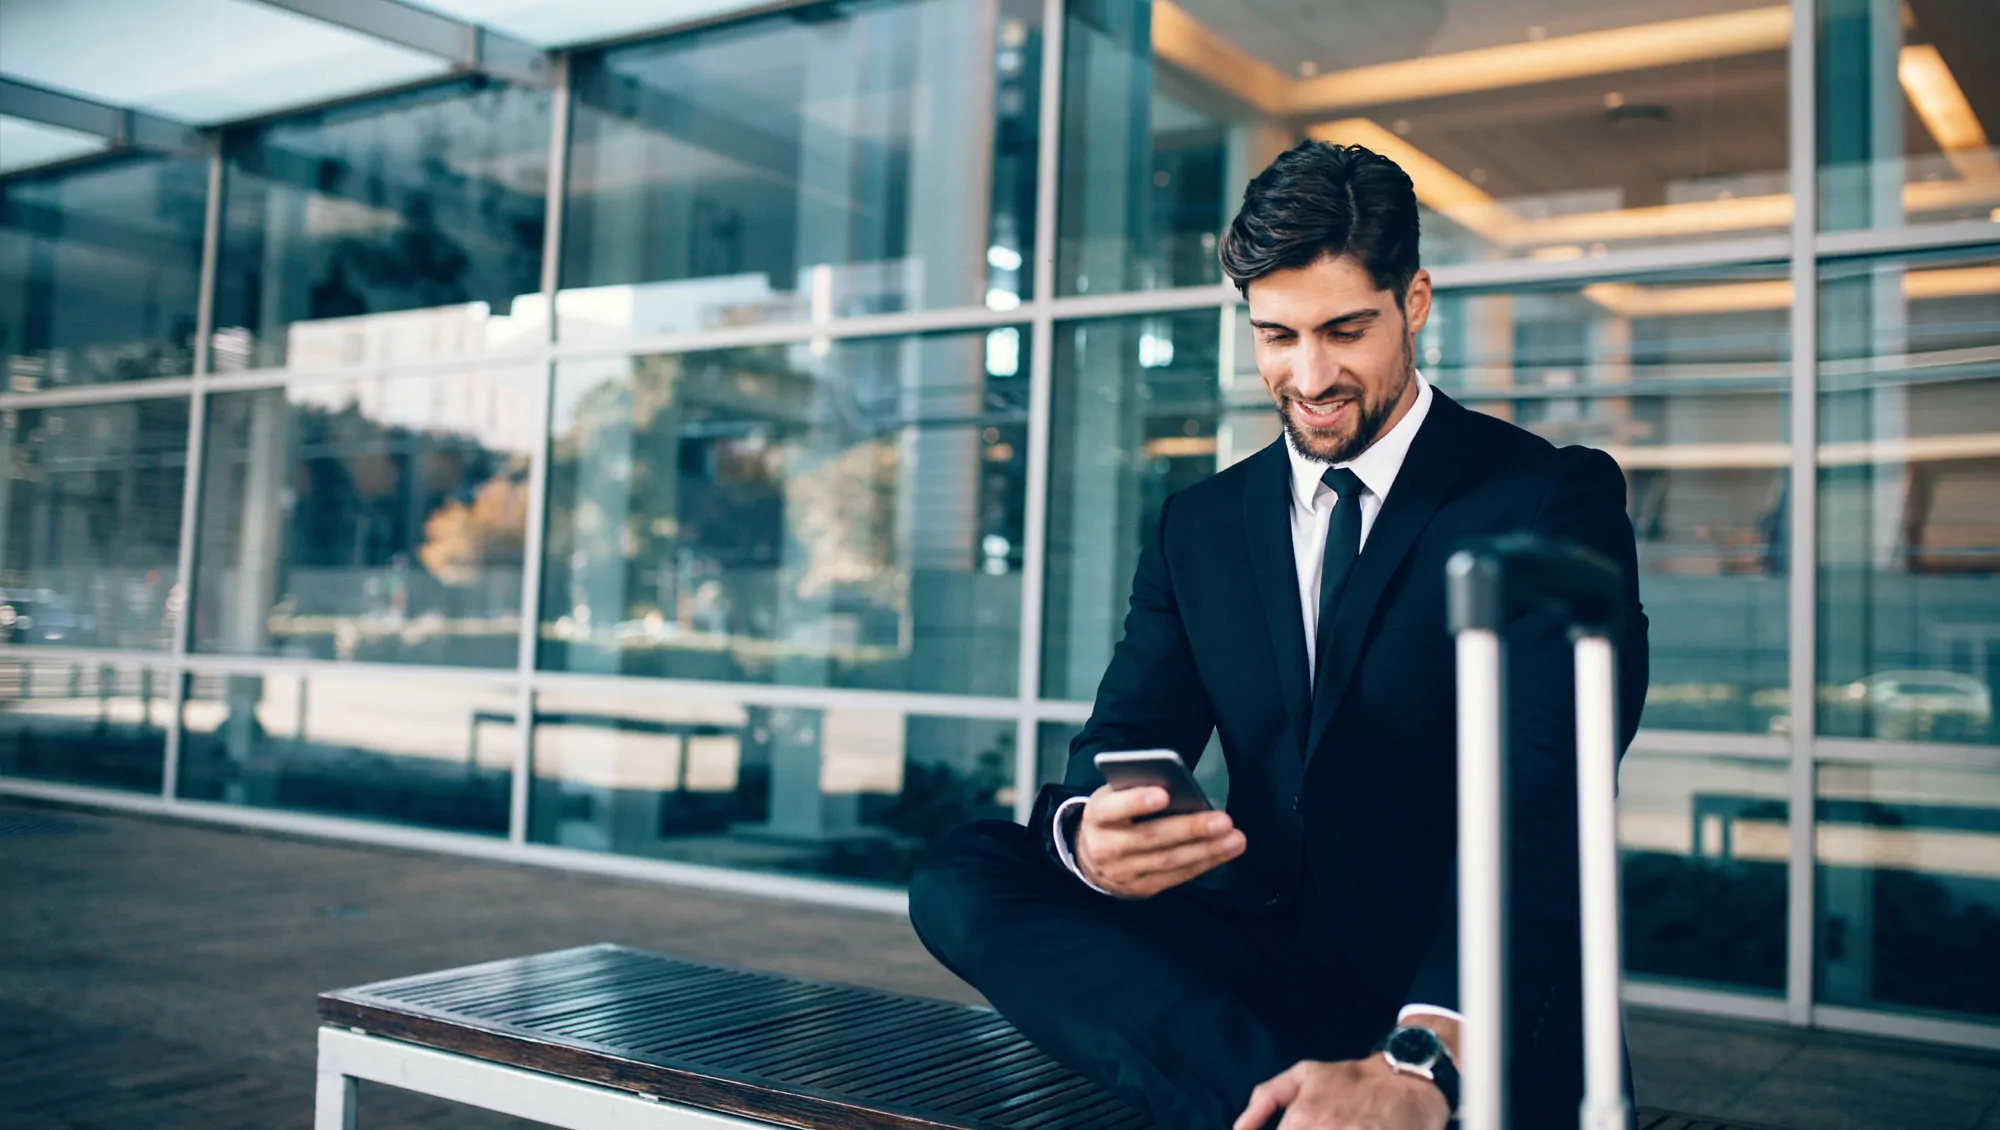 Person dressed in suit looks at phone while seated at airport